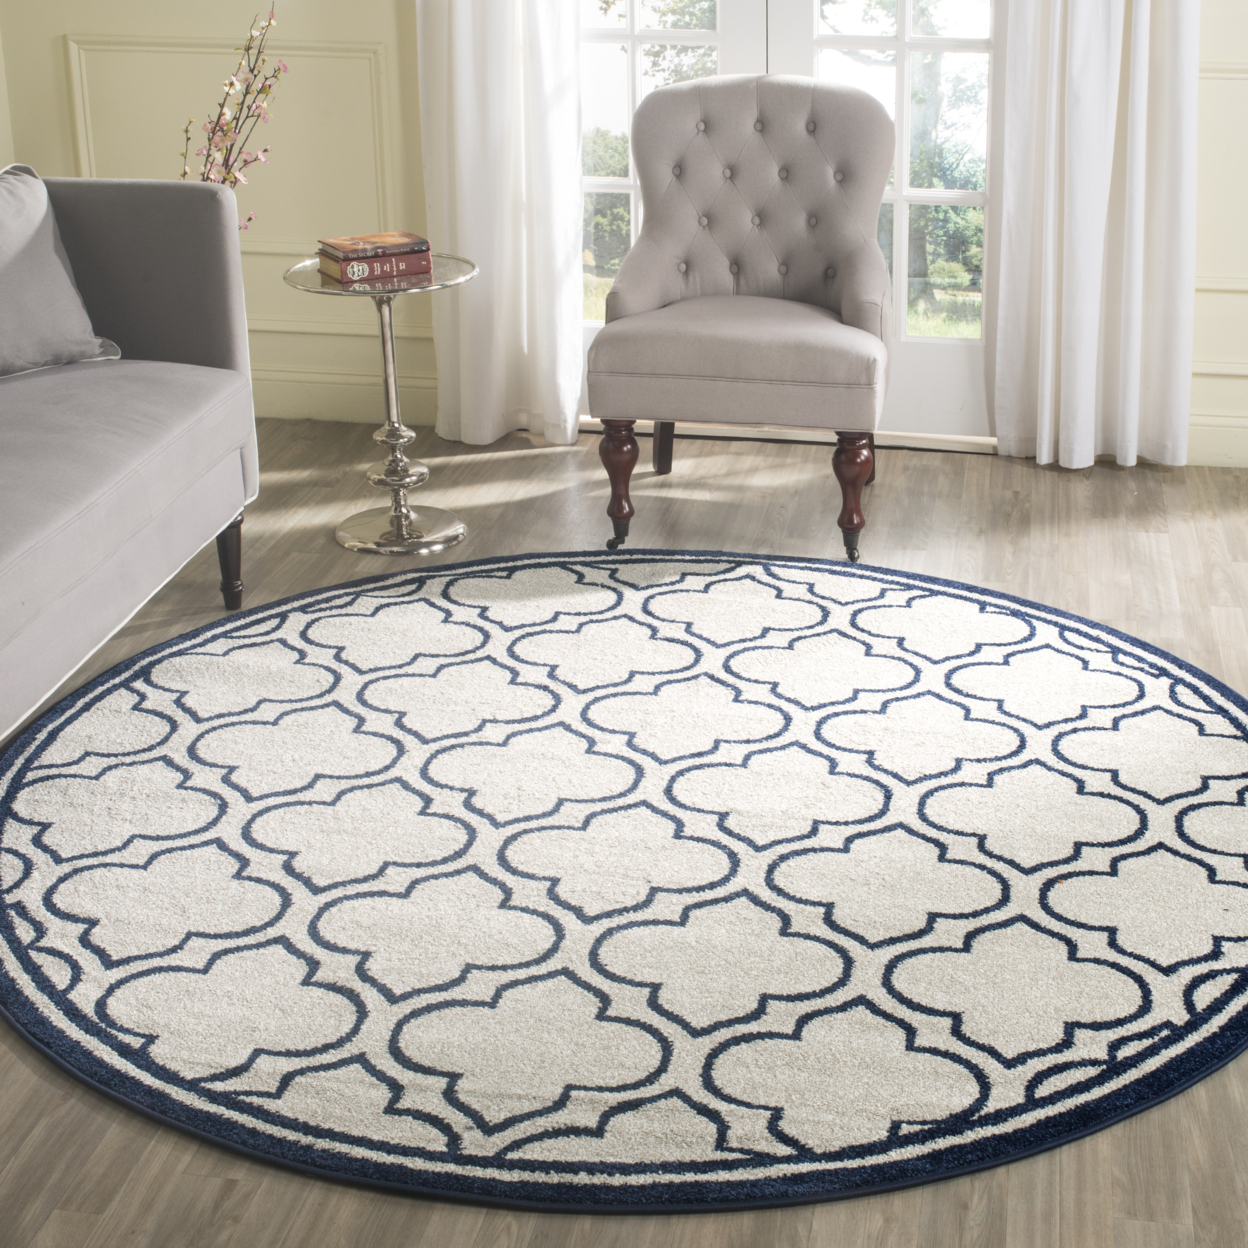 SAFAVIEH Amherst Collection AMT412M Ivory / Navy Rug - 2' 6 X 4'